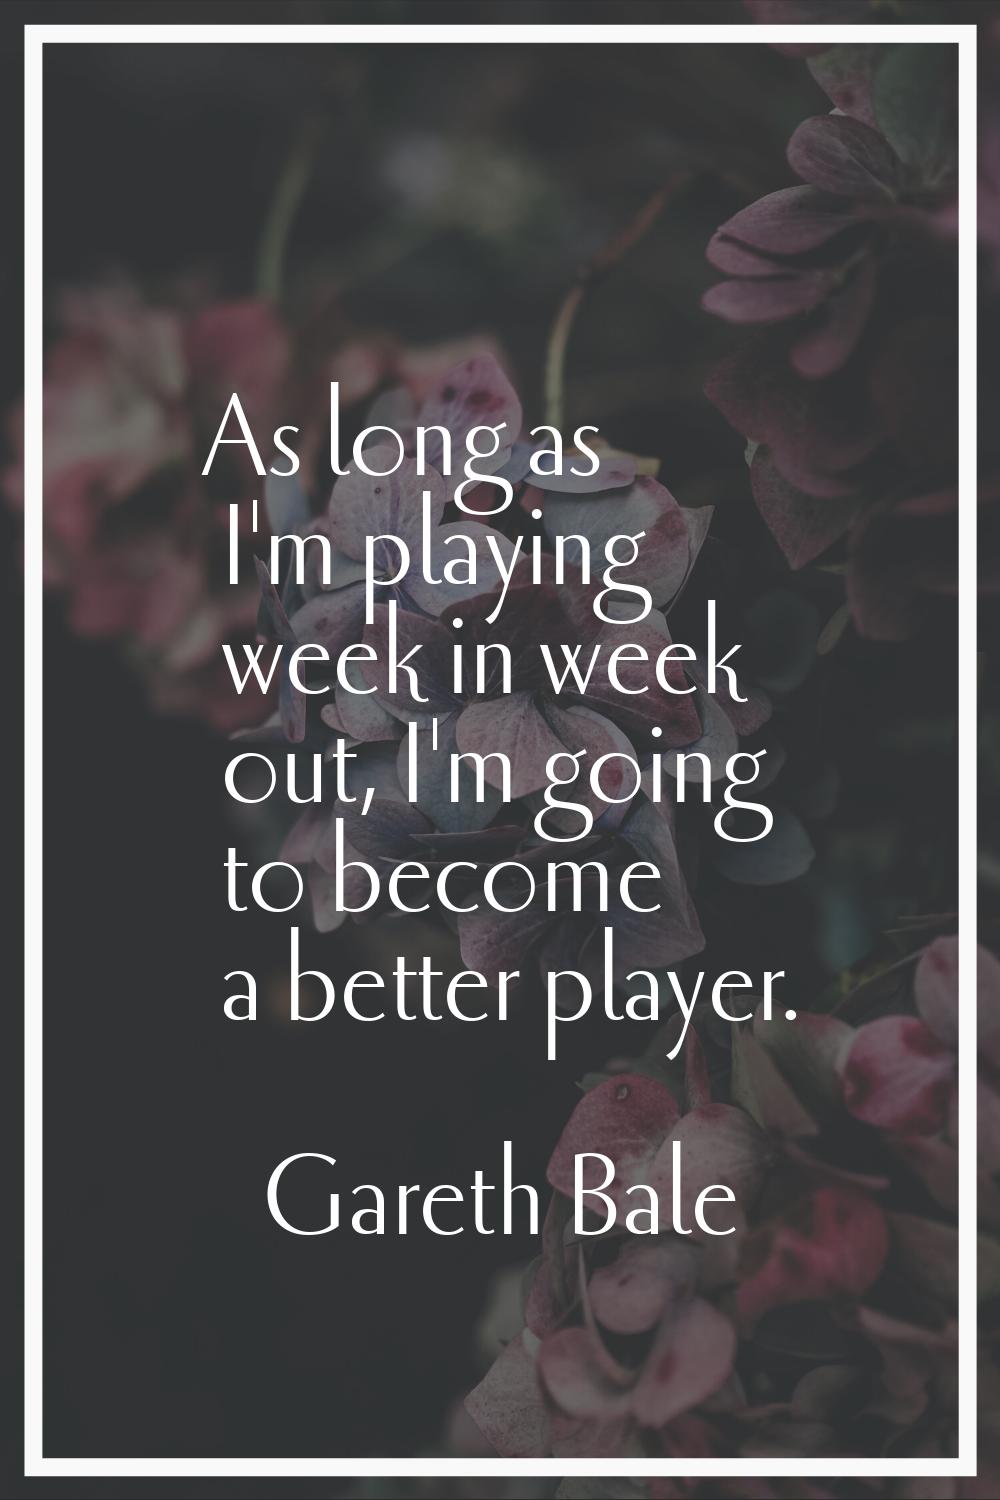 As long as I'm playing week in week out, I'm going to become a better player.